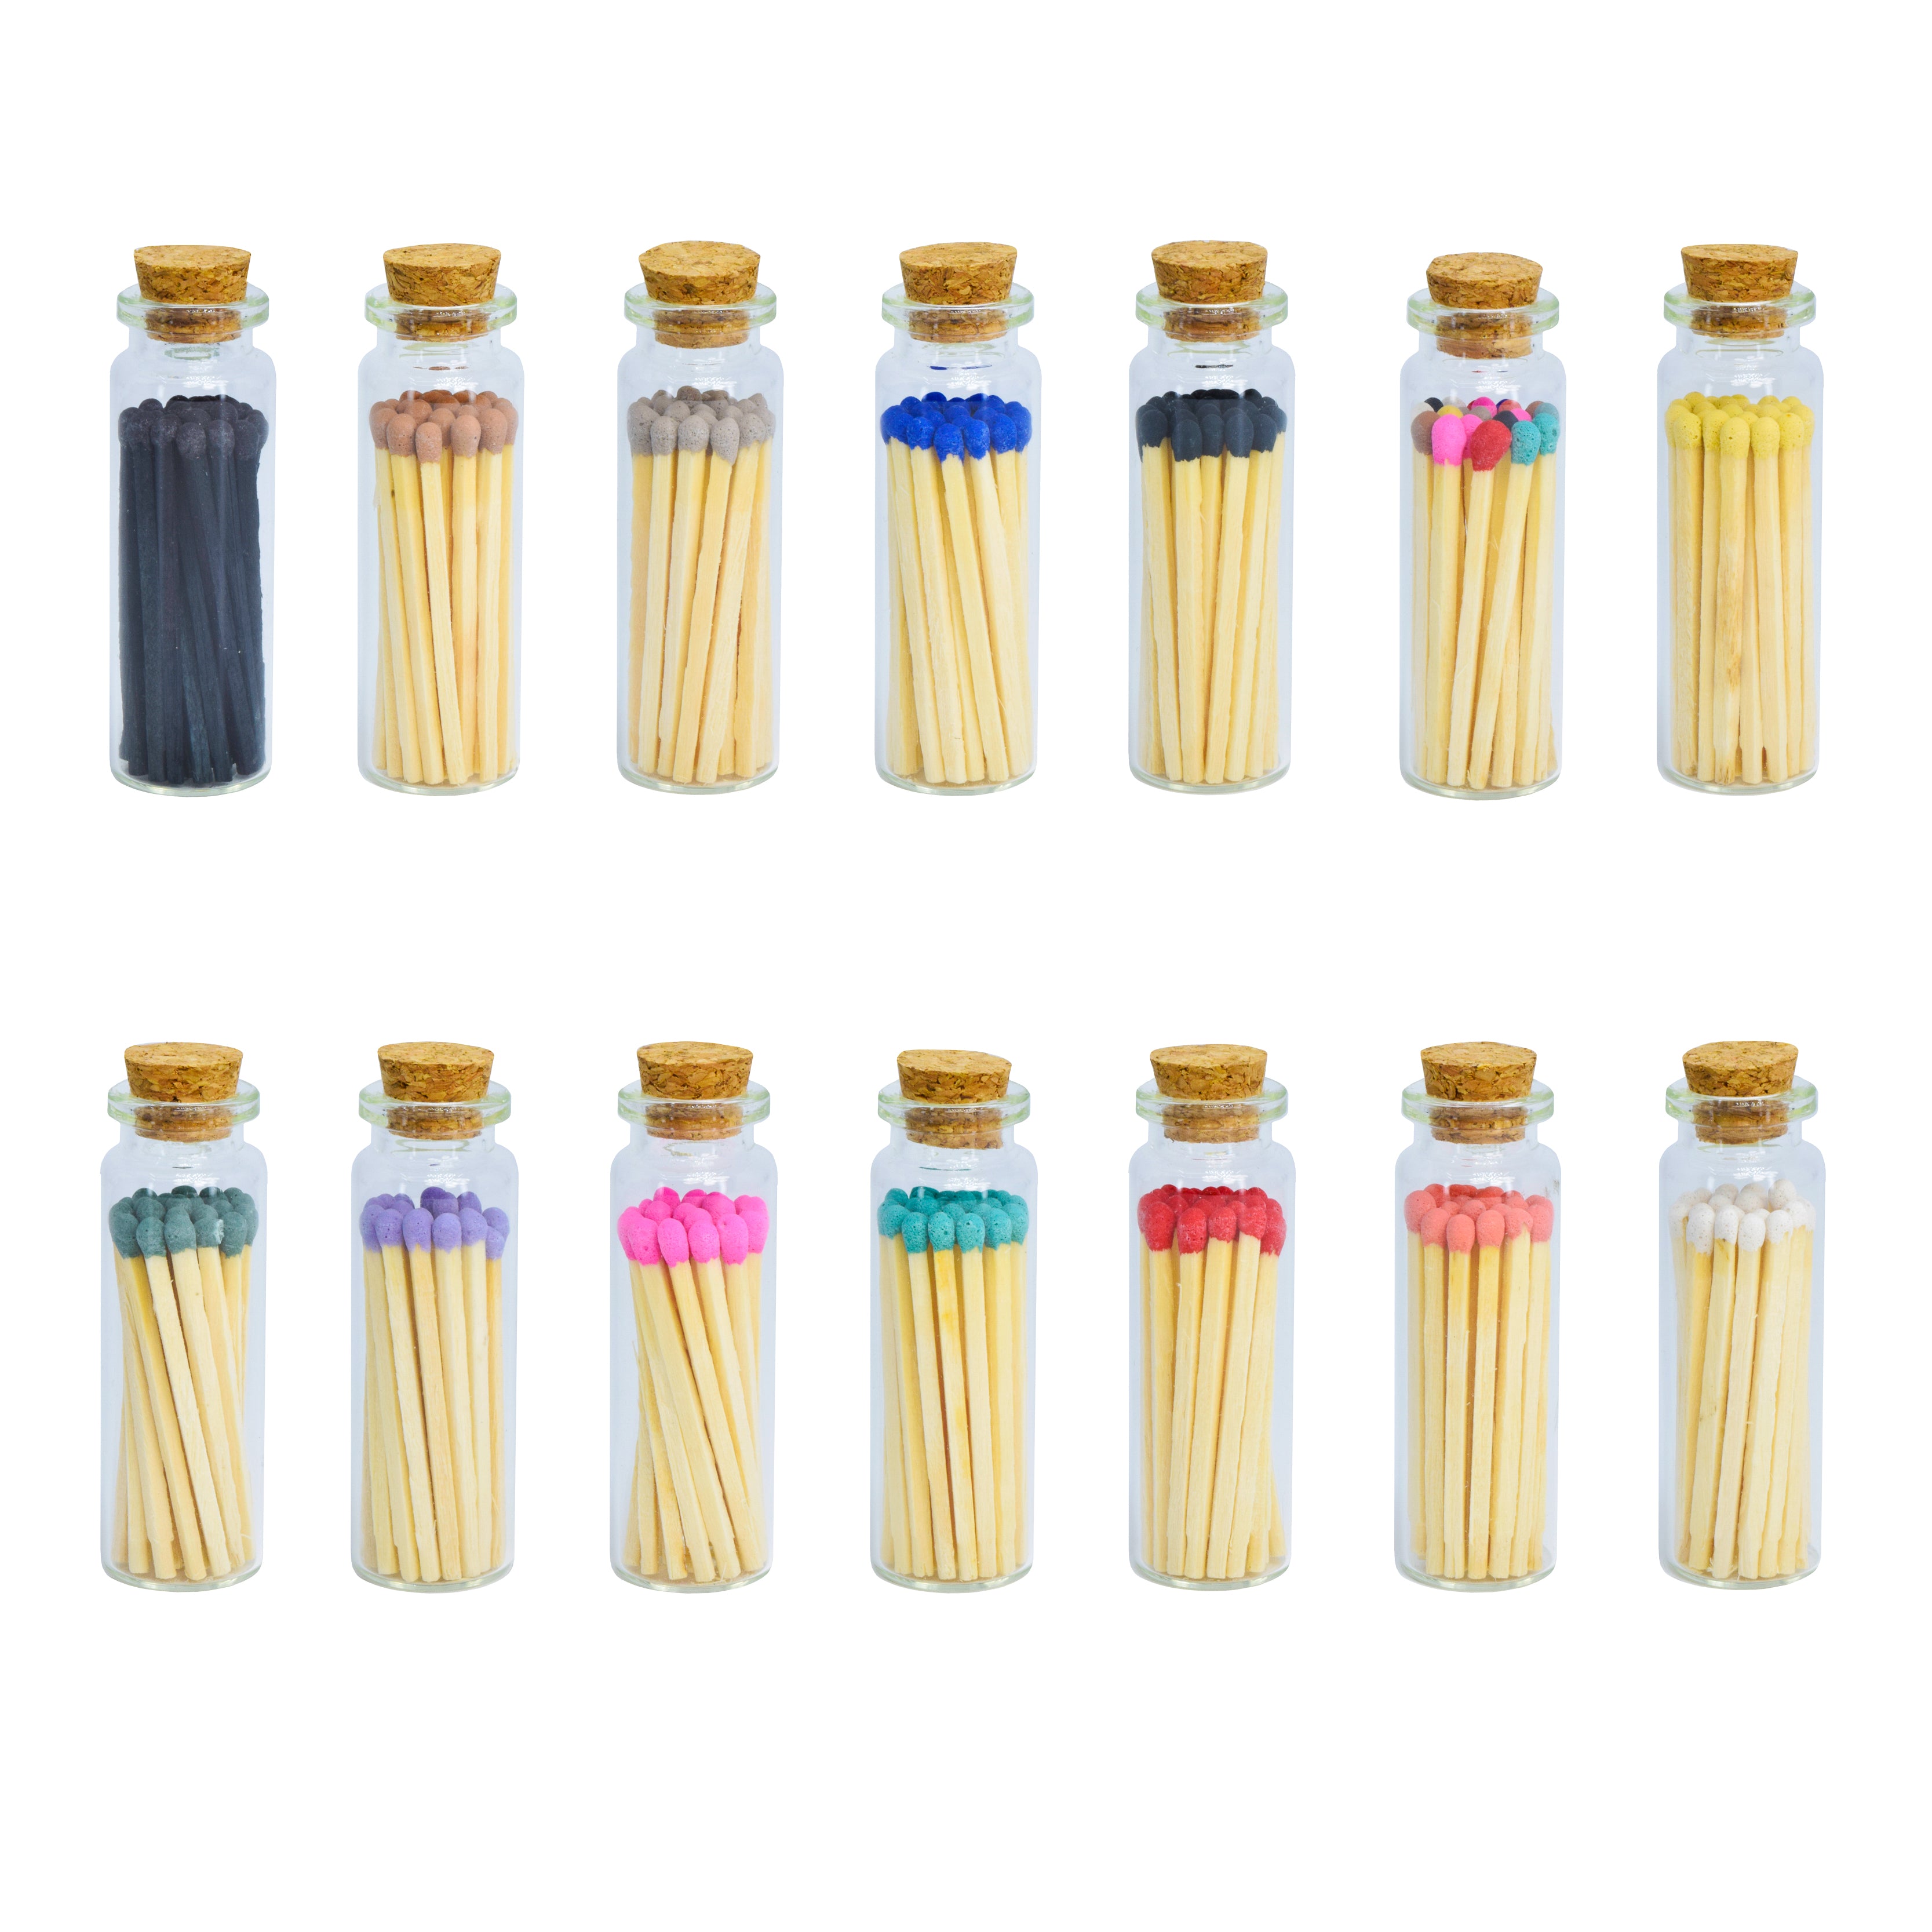 Coloured Matches